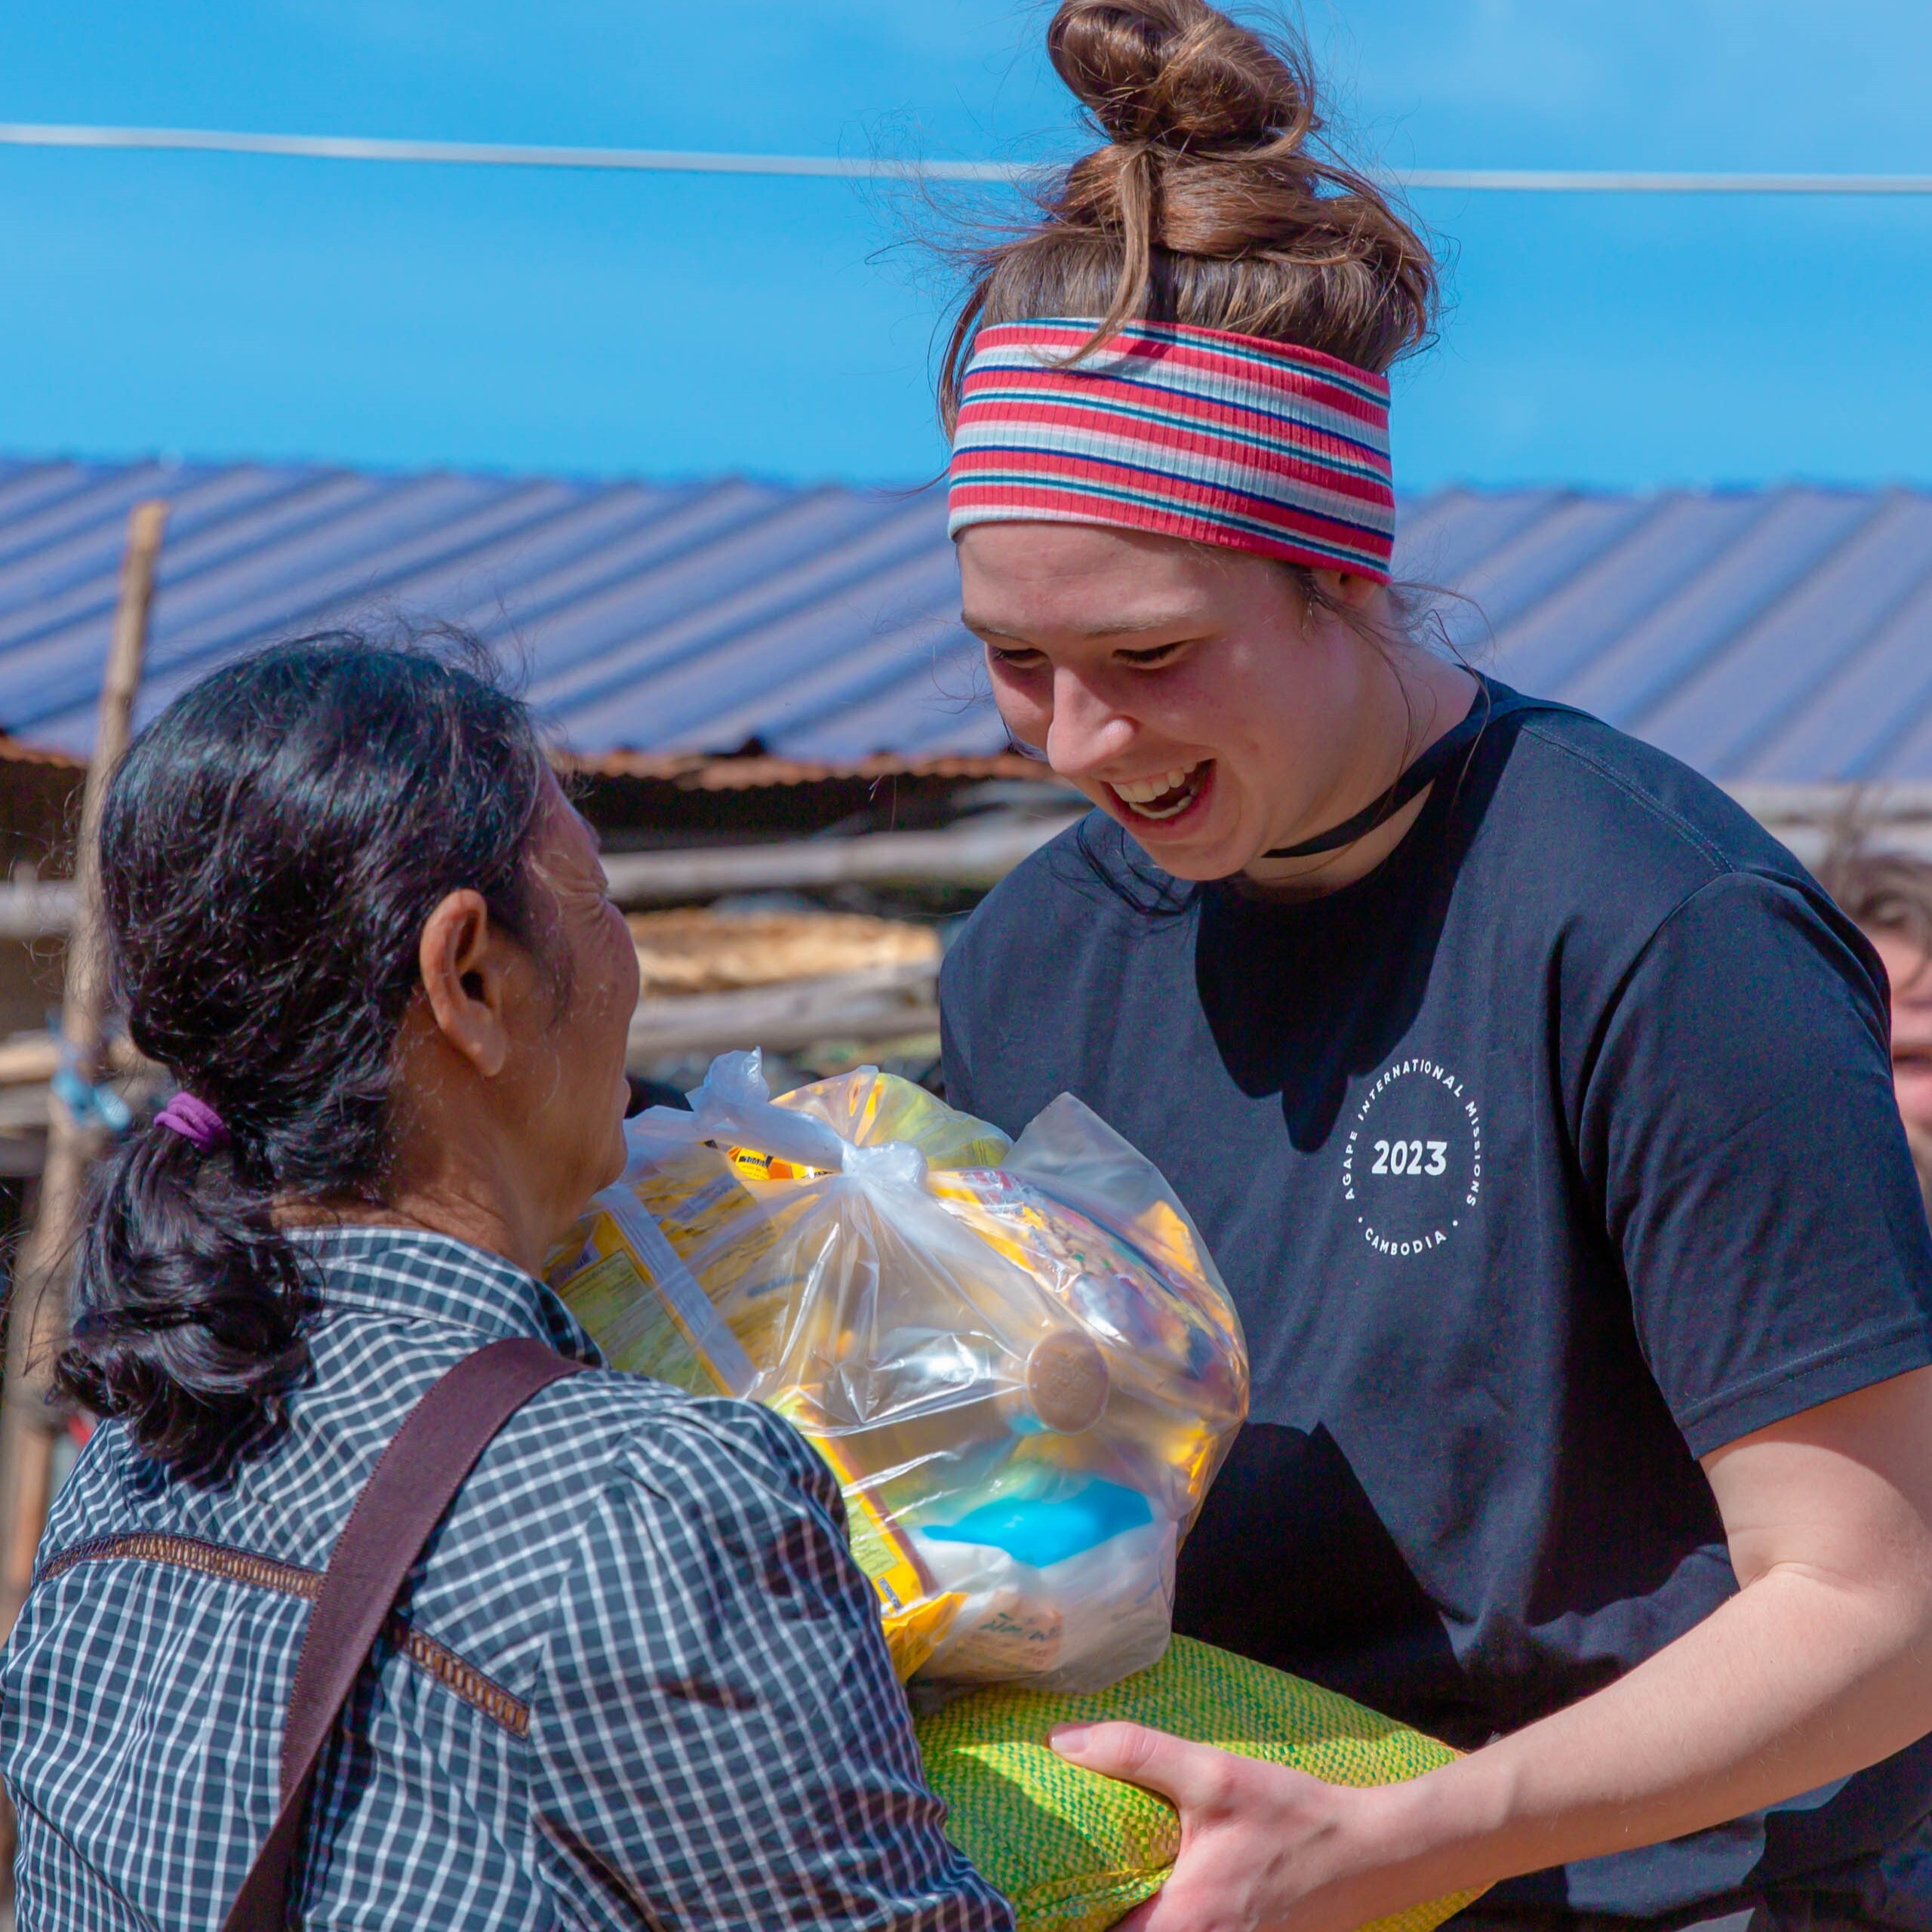 Female student on a mission trip